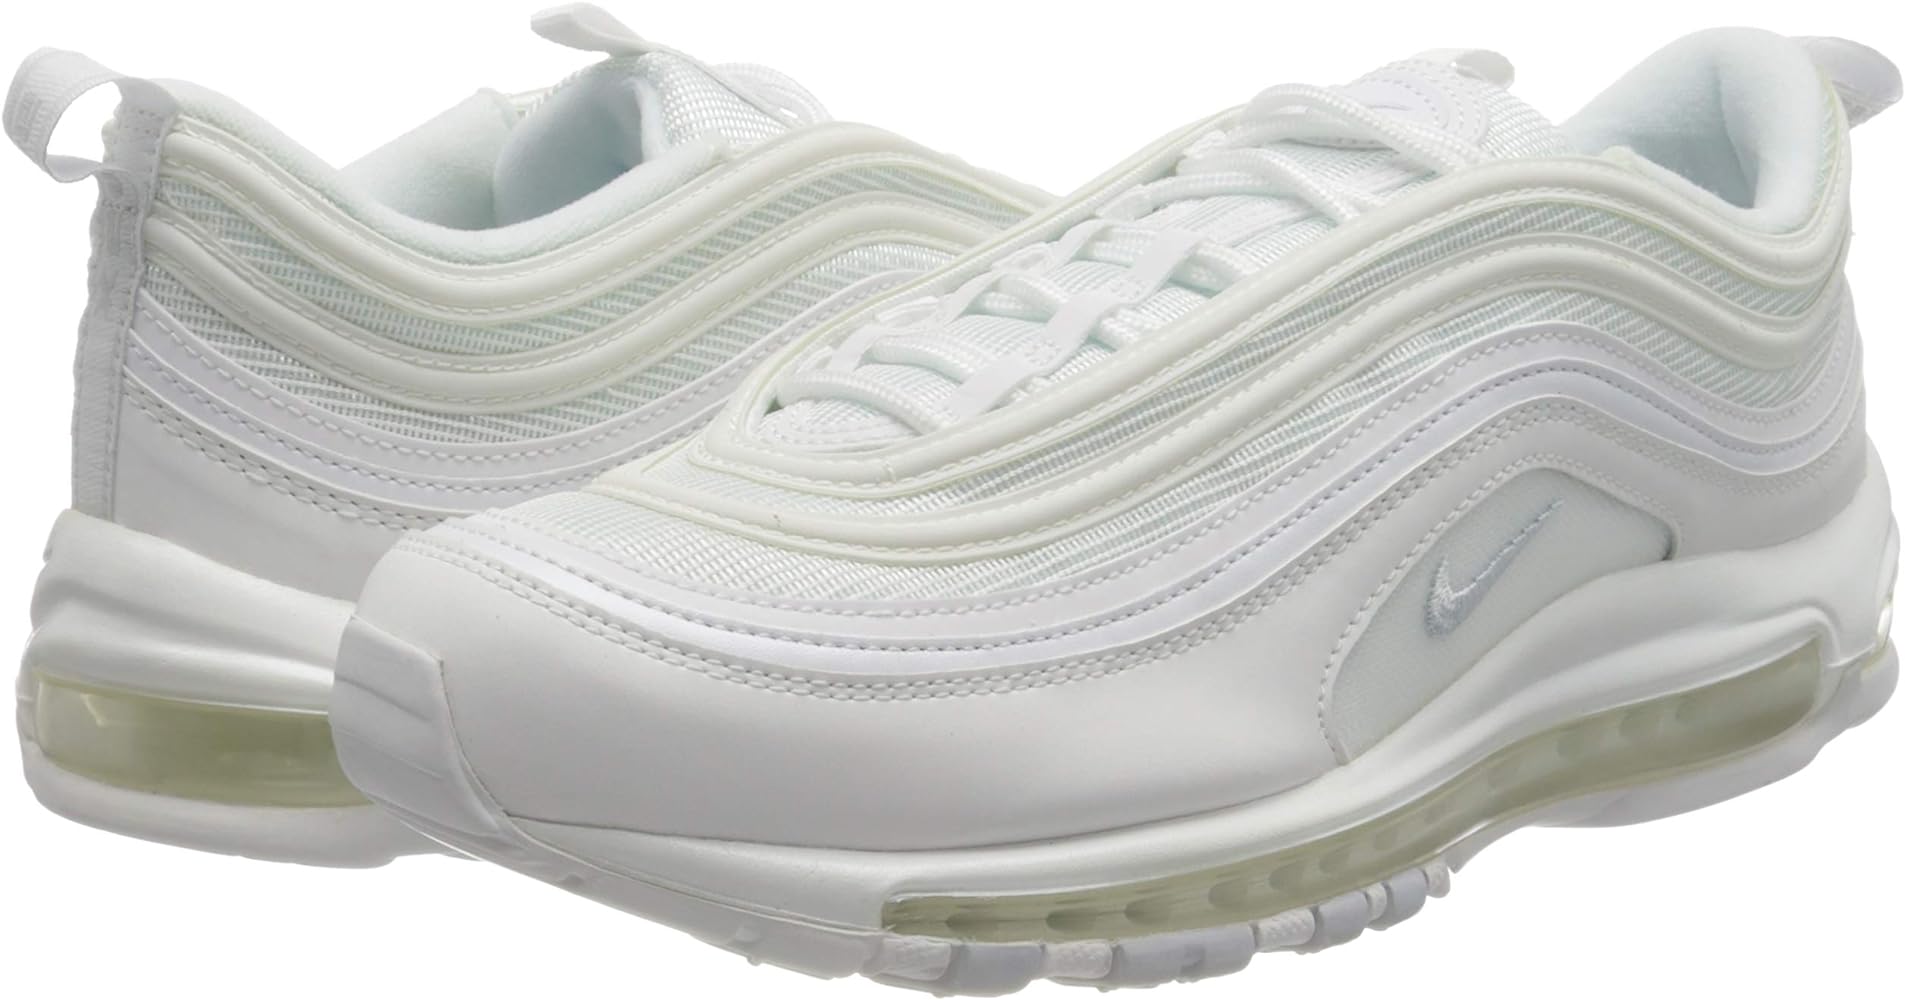 Freshen Up Your Look This Year: Why the Nike Air Max 97 White Platinum Is a Must-Have Sneaker